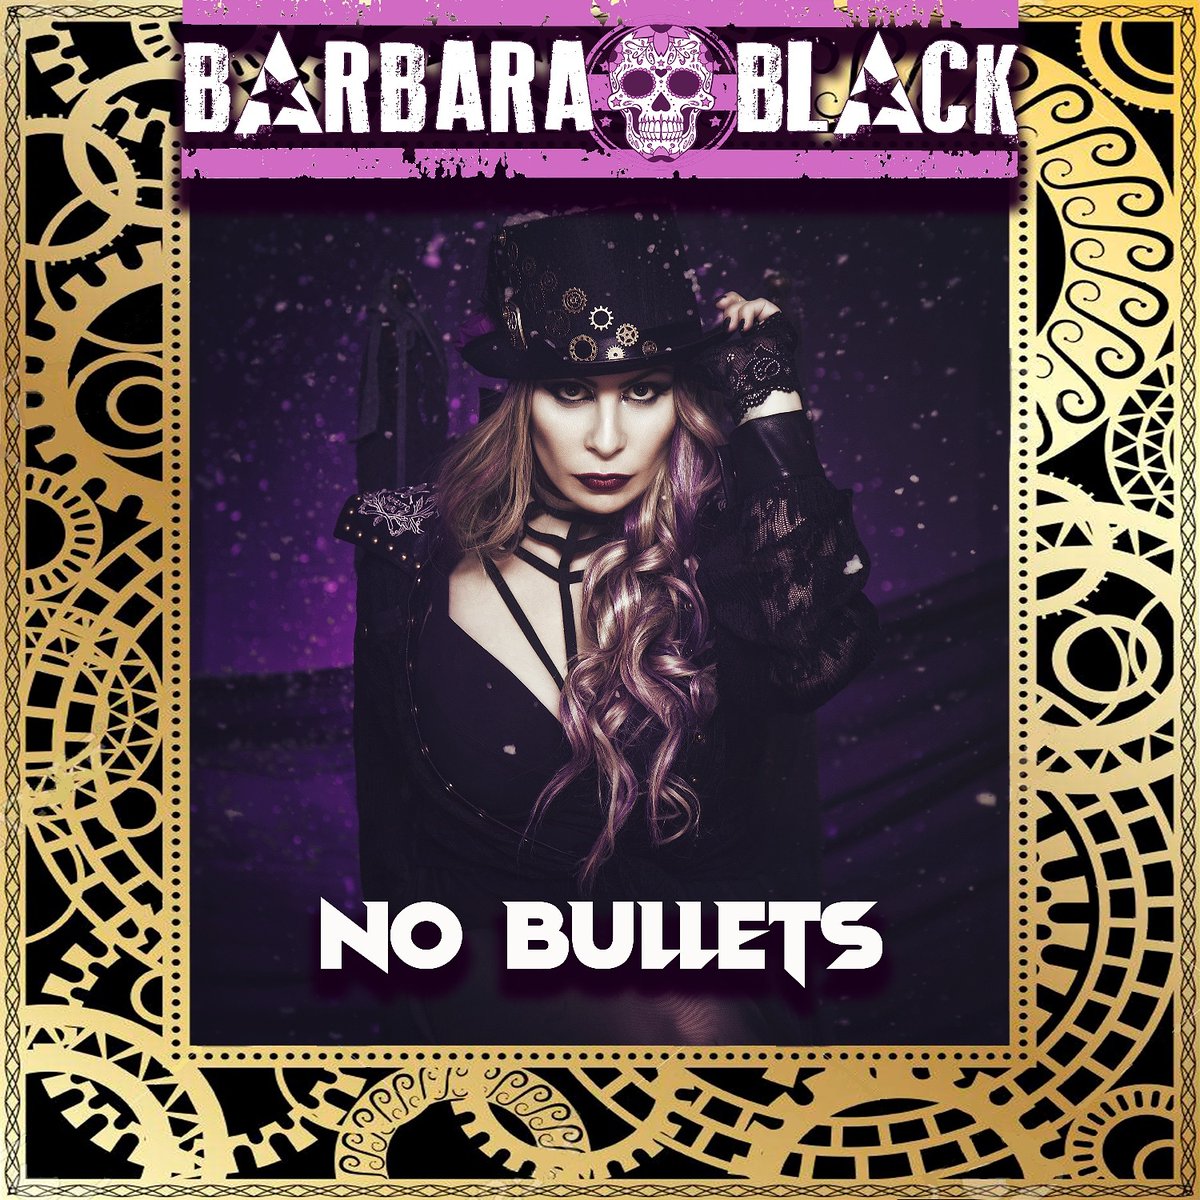 Alert! New single from @BarbaraBlack_ #Nobullets IS OUT NOW! with a very special guests #OscarSancho @LujuriaOficial #CecilioSanchez @ankhara_oficial barbarablackrock.com
#recording #mix #master #producer #Cadillacbloodstudios

youtube.com/watch?v=hOOwbY…